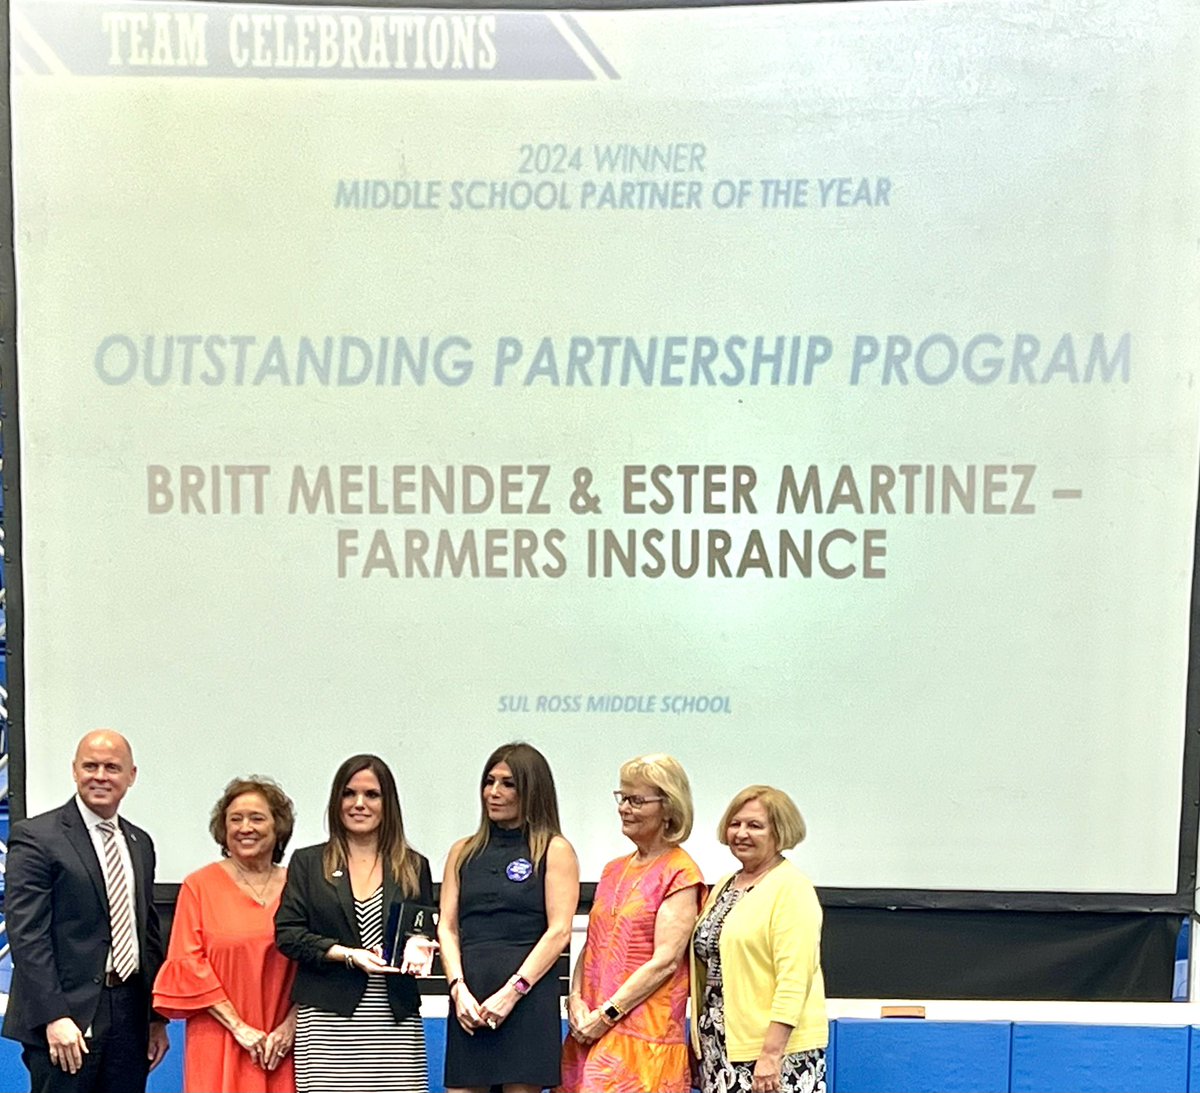 These two amazing women support and give so much to our @NISDRoss families and staff. Farmers Insurance boss ladies are the best! Thank you @britt_melendez and Ester Martinez 🫶🏼🙌🏼💚💛